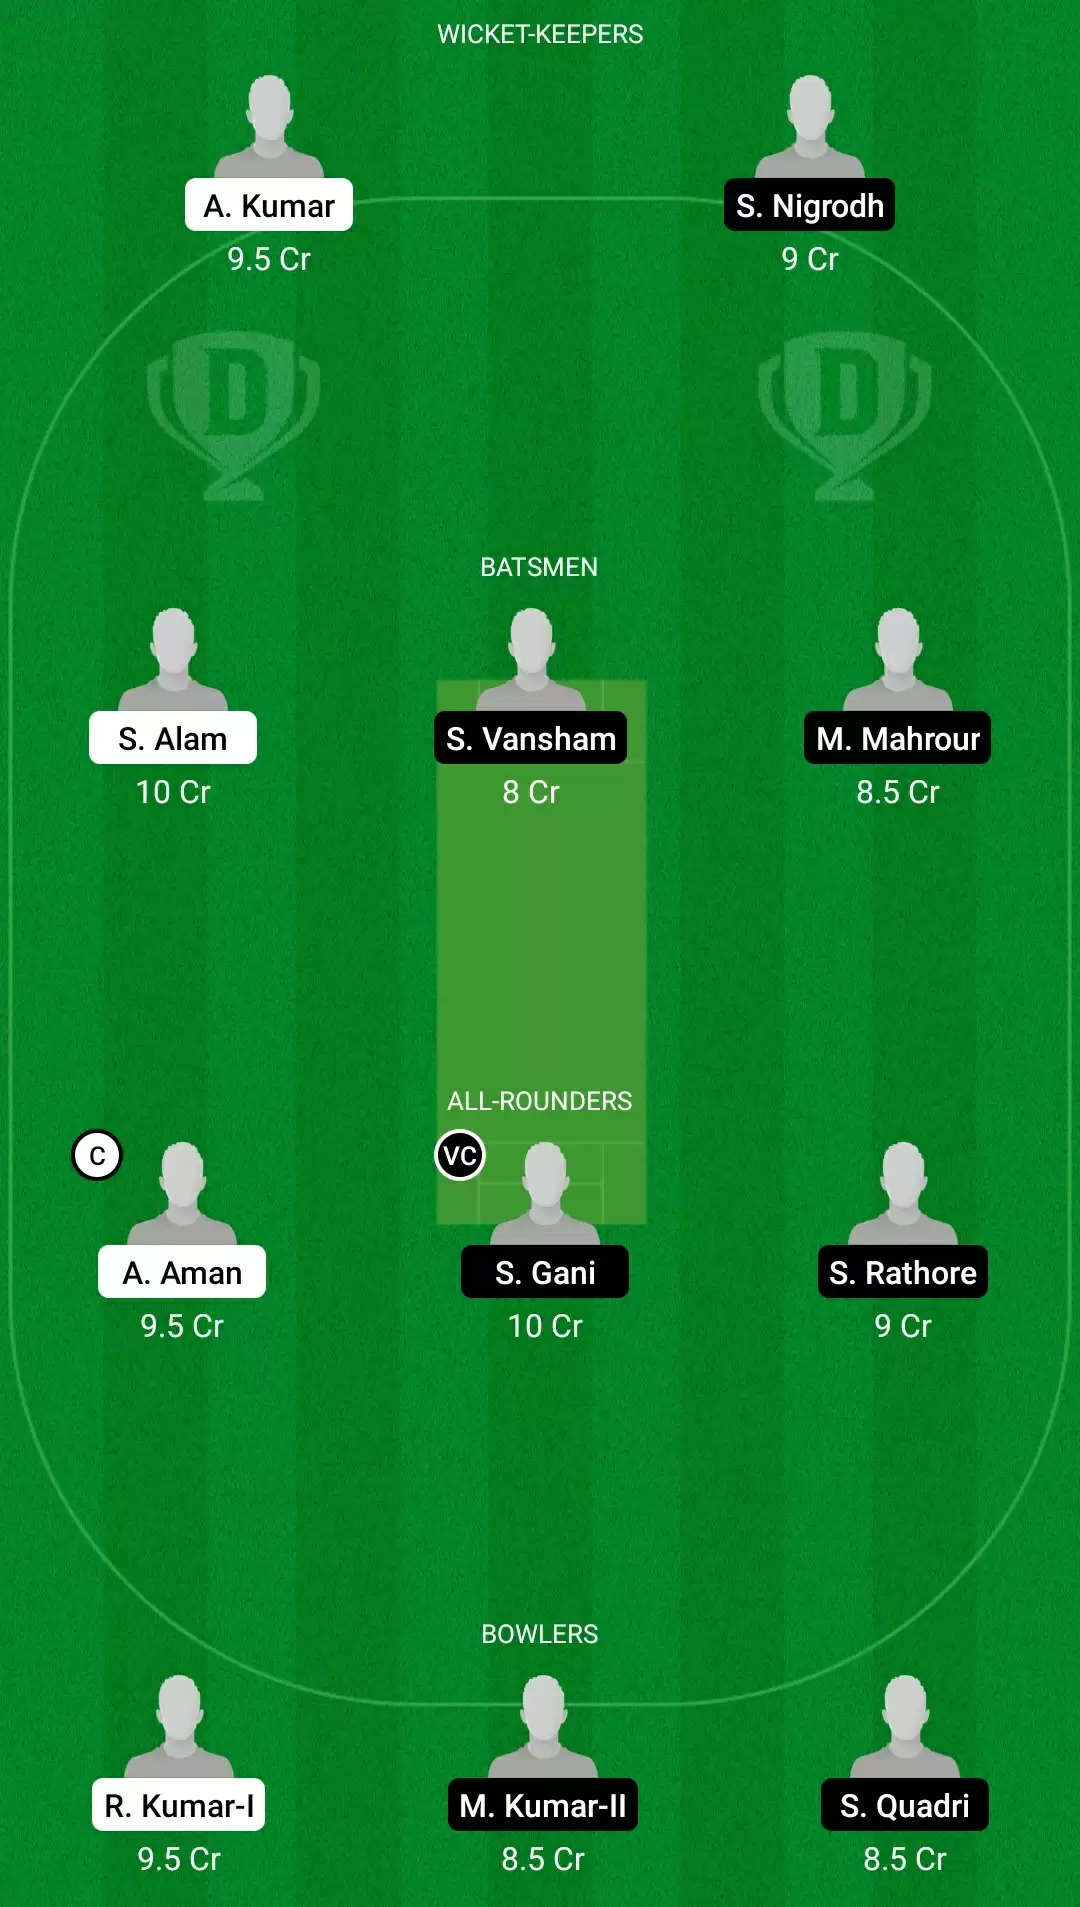 Bihar Cricket League T20 2021, Semifinal 1: AA vs PP Dream11 Prediction, Fantasy Cricket Tips, Team, Playing 11, Pitch Report, Weather Conditions and Injury Update